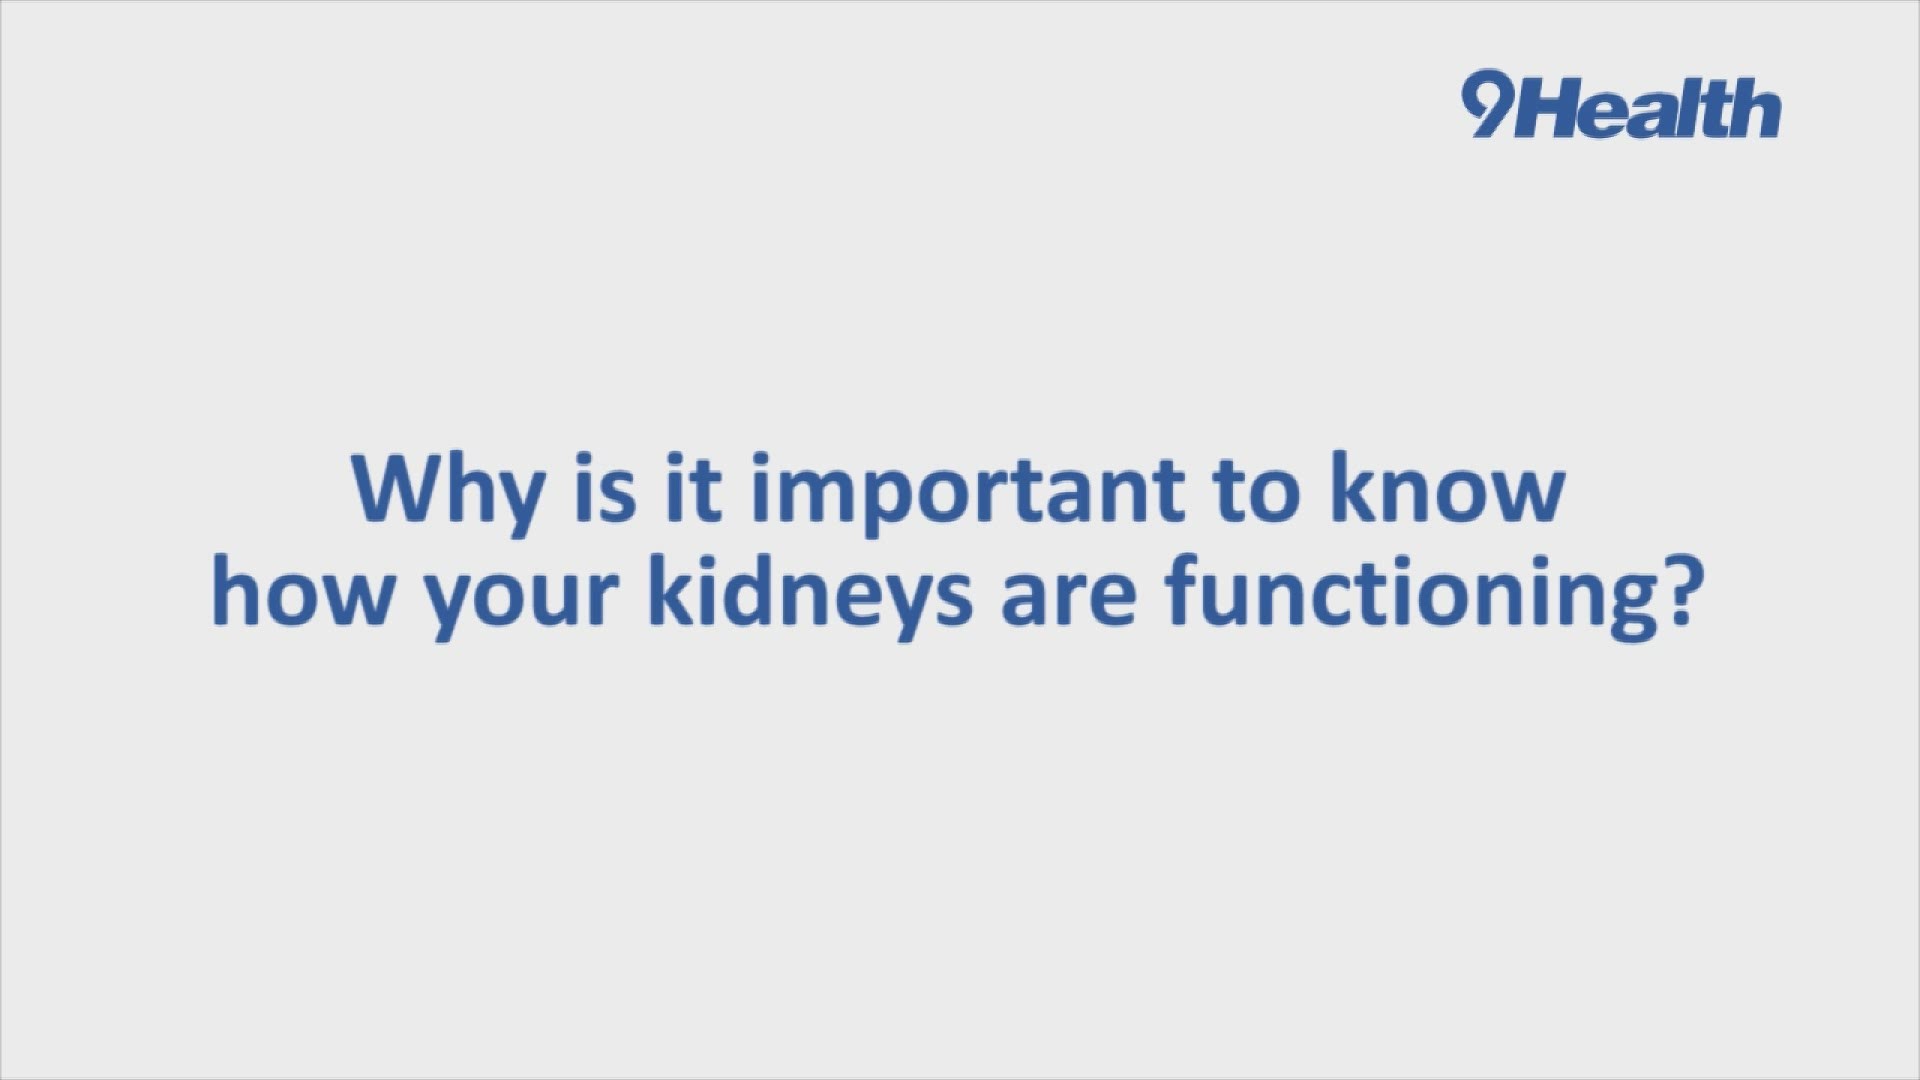 9Health Expert Dr. Payal Kohli talks about why checking your kidney health is important. You can now get many 9Health blood screenings through Quest Diagnostics.